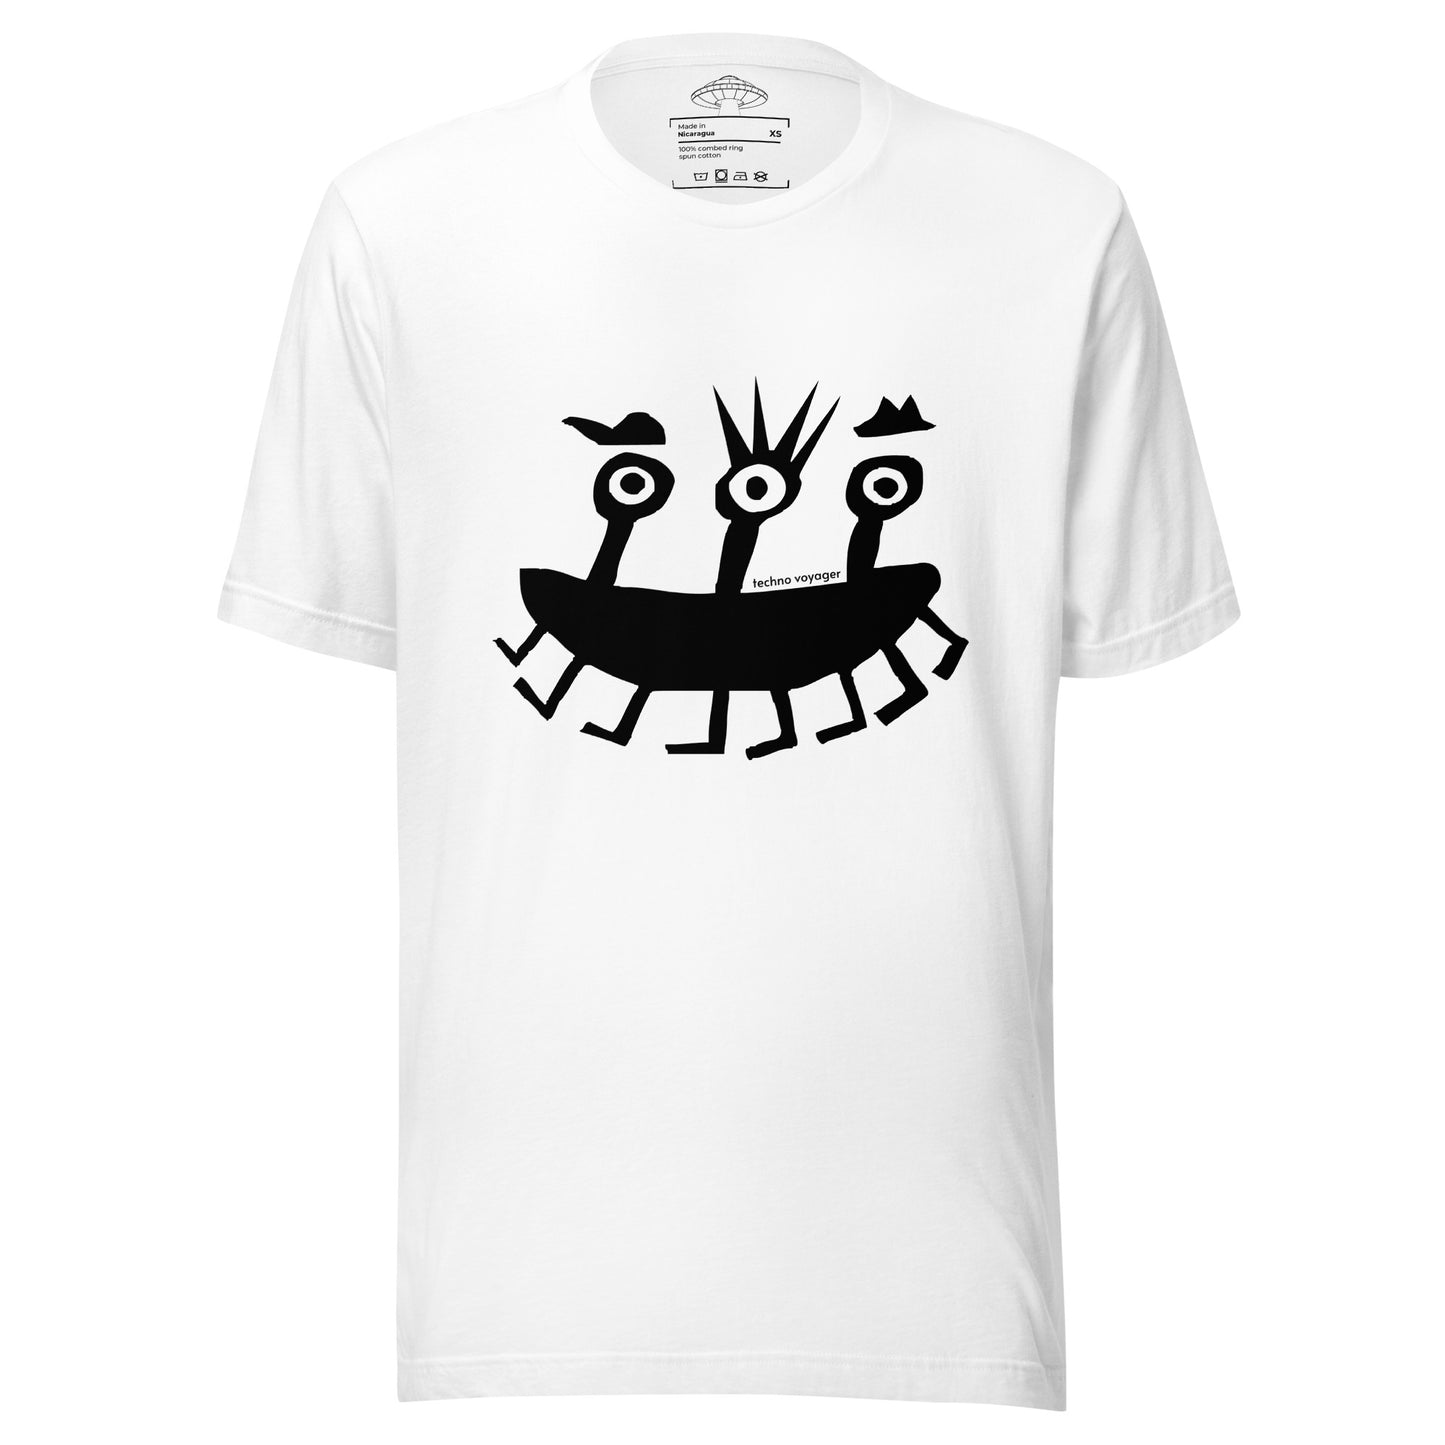 'AFTERS CREATURE' Unisex T-Shirt